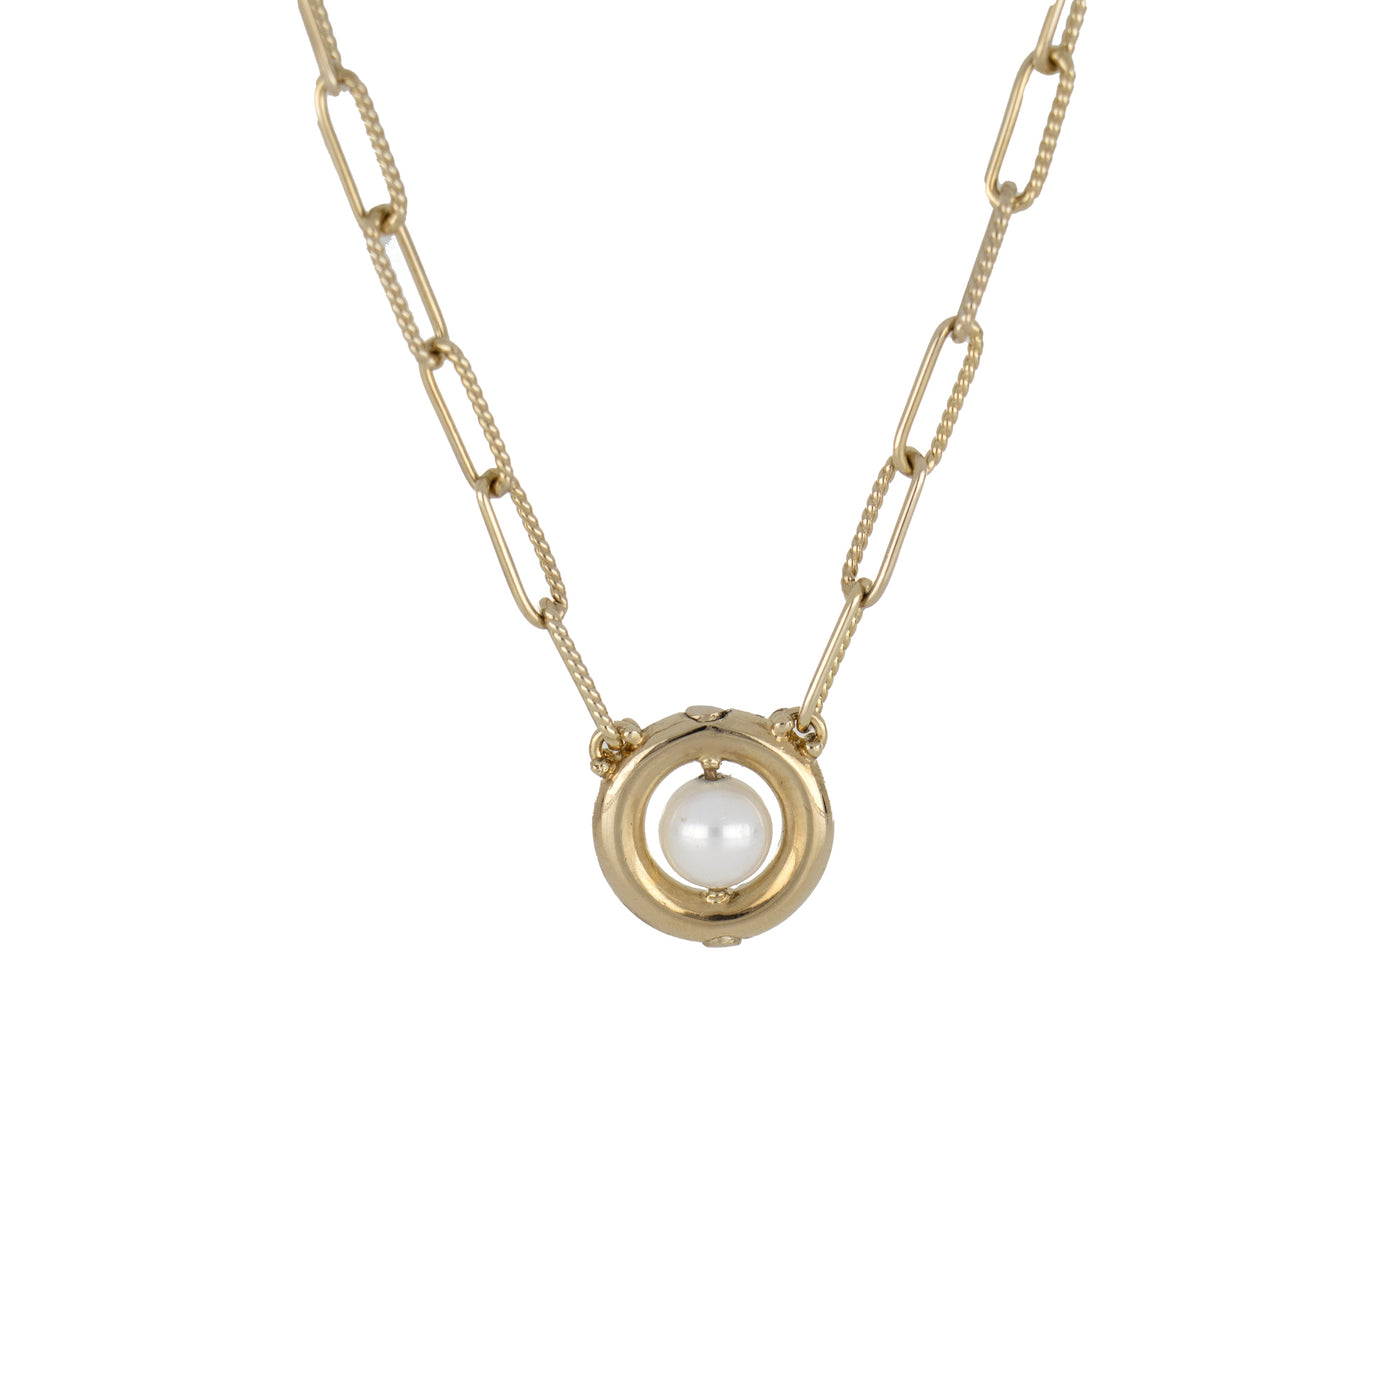 Diamante - Gold Necklace with Pearl Inset